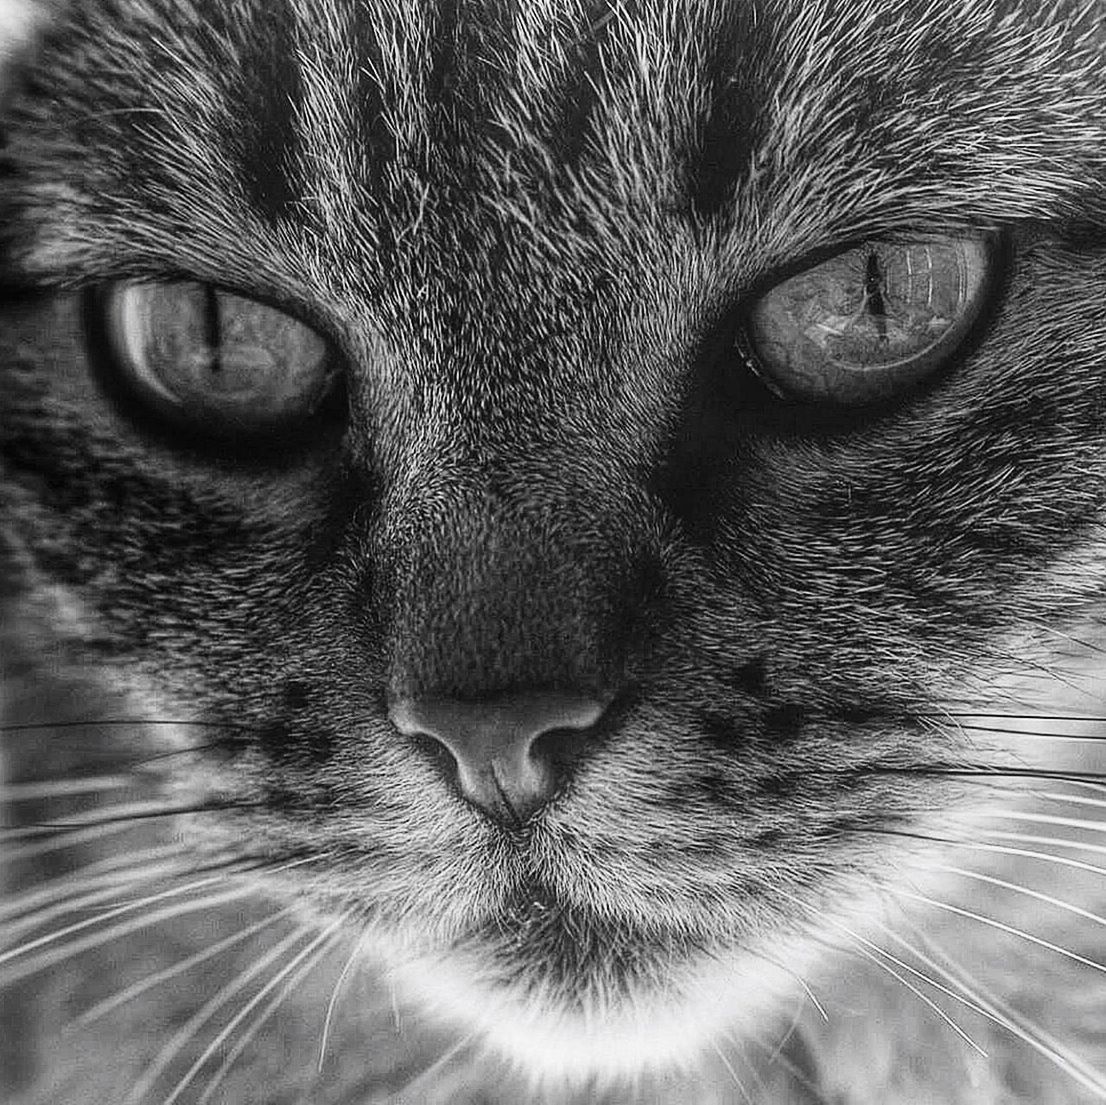 animal themes, one animal, pets, domestic cat, close-up, mammal, animal eye, cat, whisker, domestic animals, animal head, feline, animal body part, portrait, looking at camera, full frame, backgrounds, extreme close-up, part of, staring